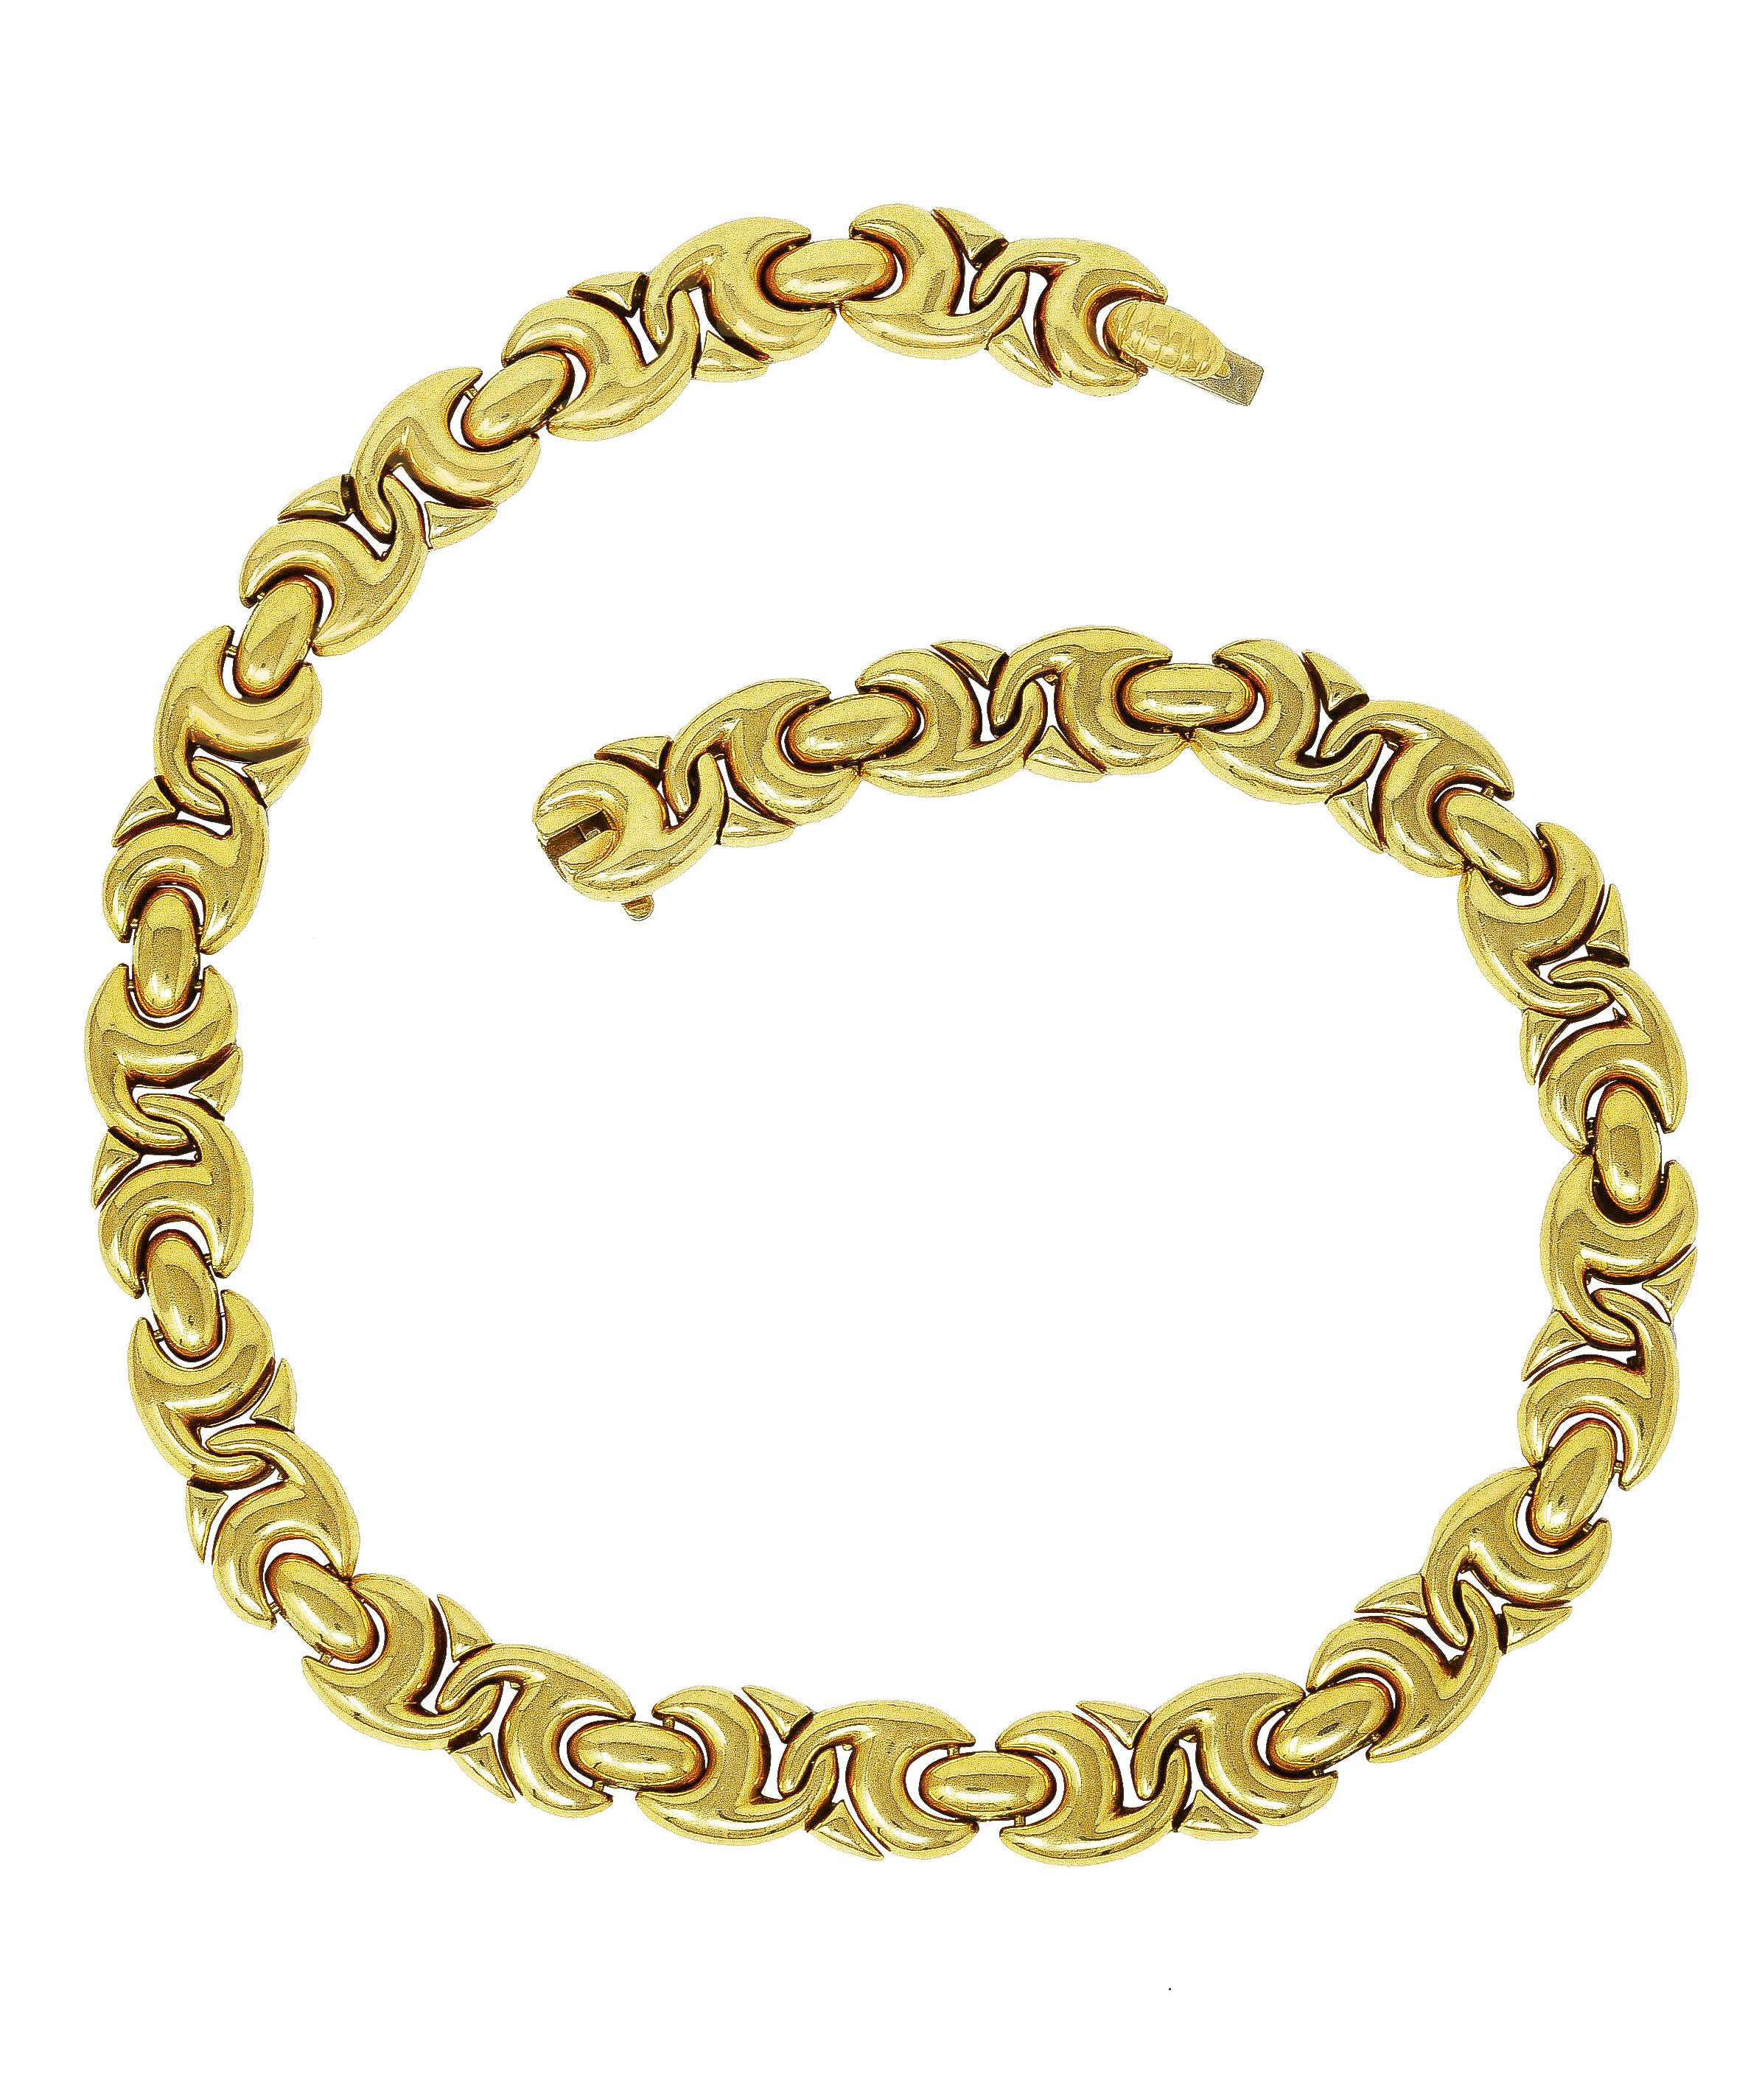 Necklace features puffy stylized links with interlocking twist motif. With high polish finish. Completed by press release closure. Stamped 750 with Italian assay marks for 18 karat gold. Numbered and fully signed for Bvlgari. Circa: 1980's from the